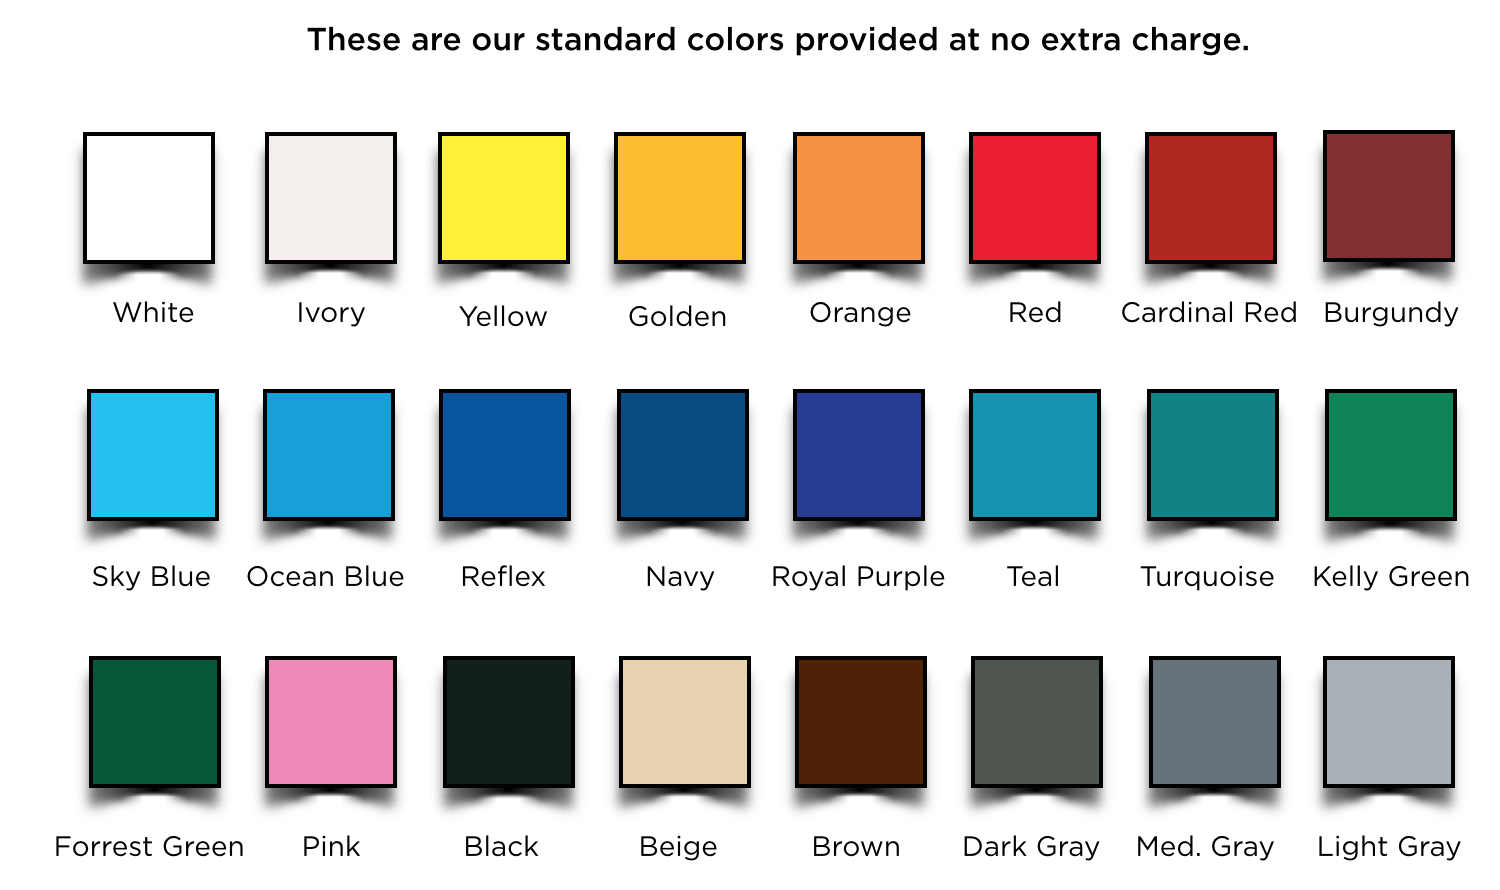 https://www.lobbysigns.com/wp-content/uploads/2014/02/color-chart1-2.png